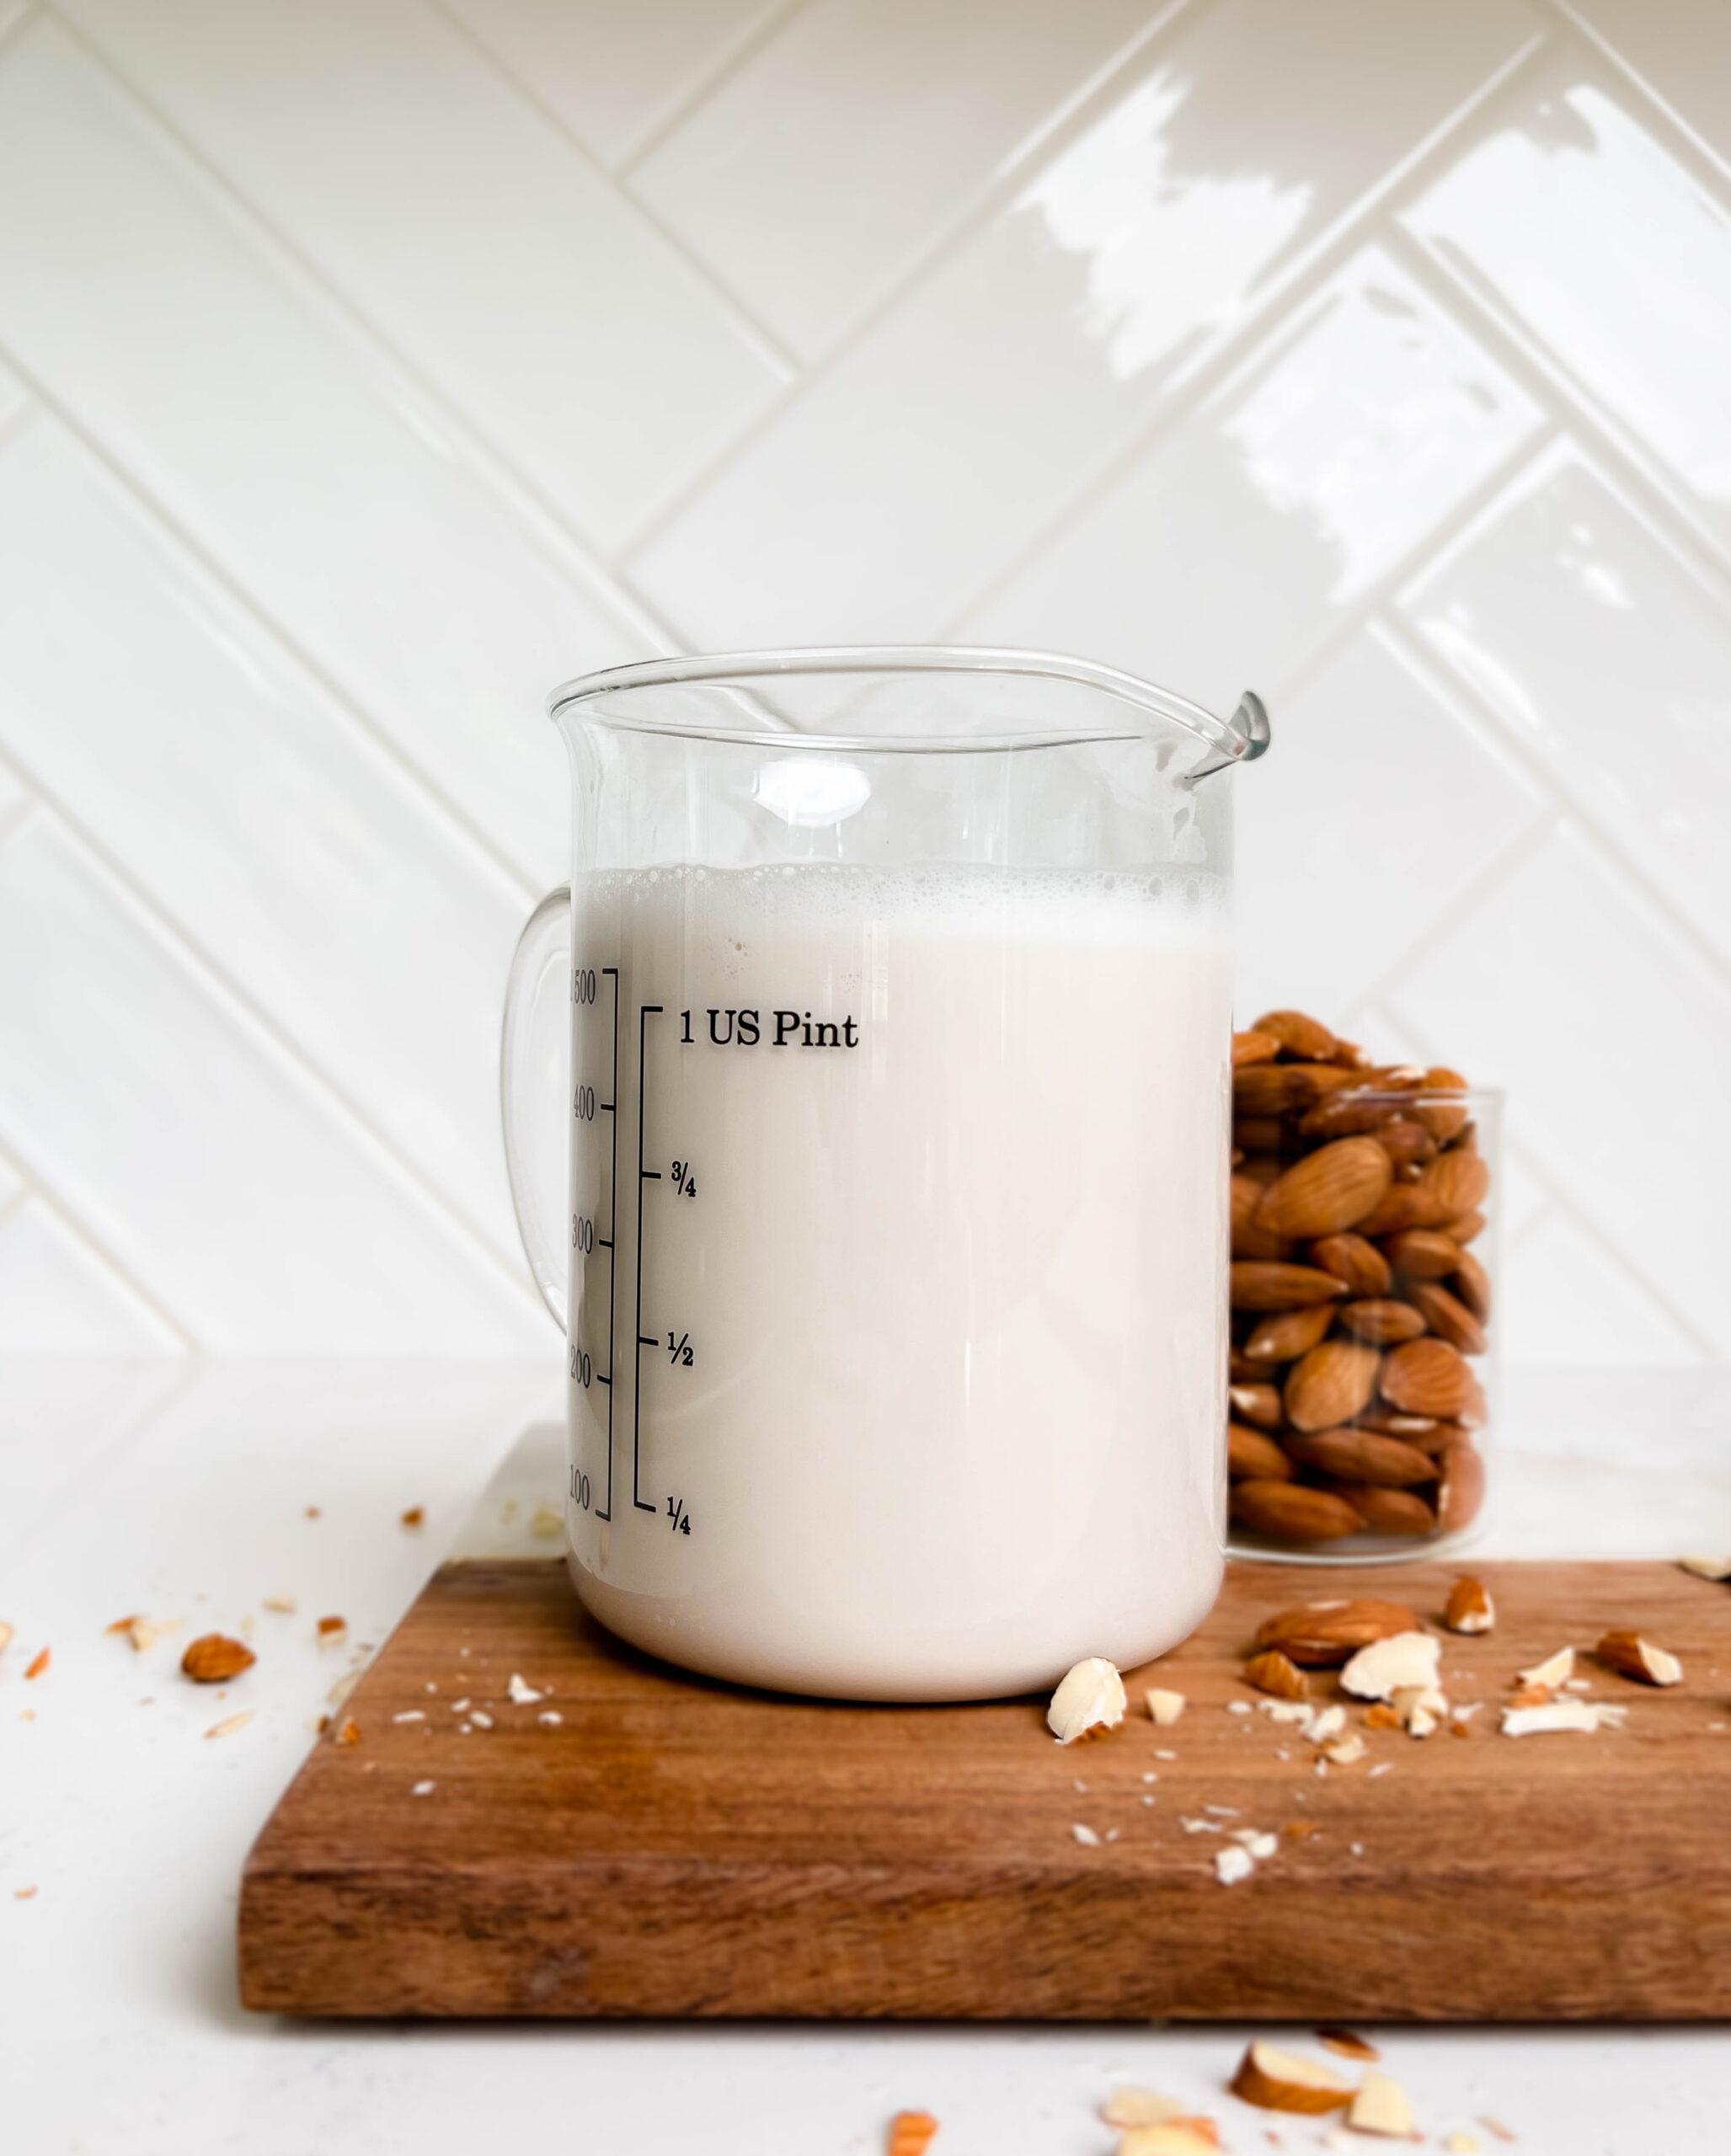 homemade almond milk in a glass pitcher on a wooden cutting board